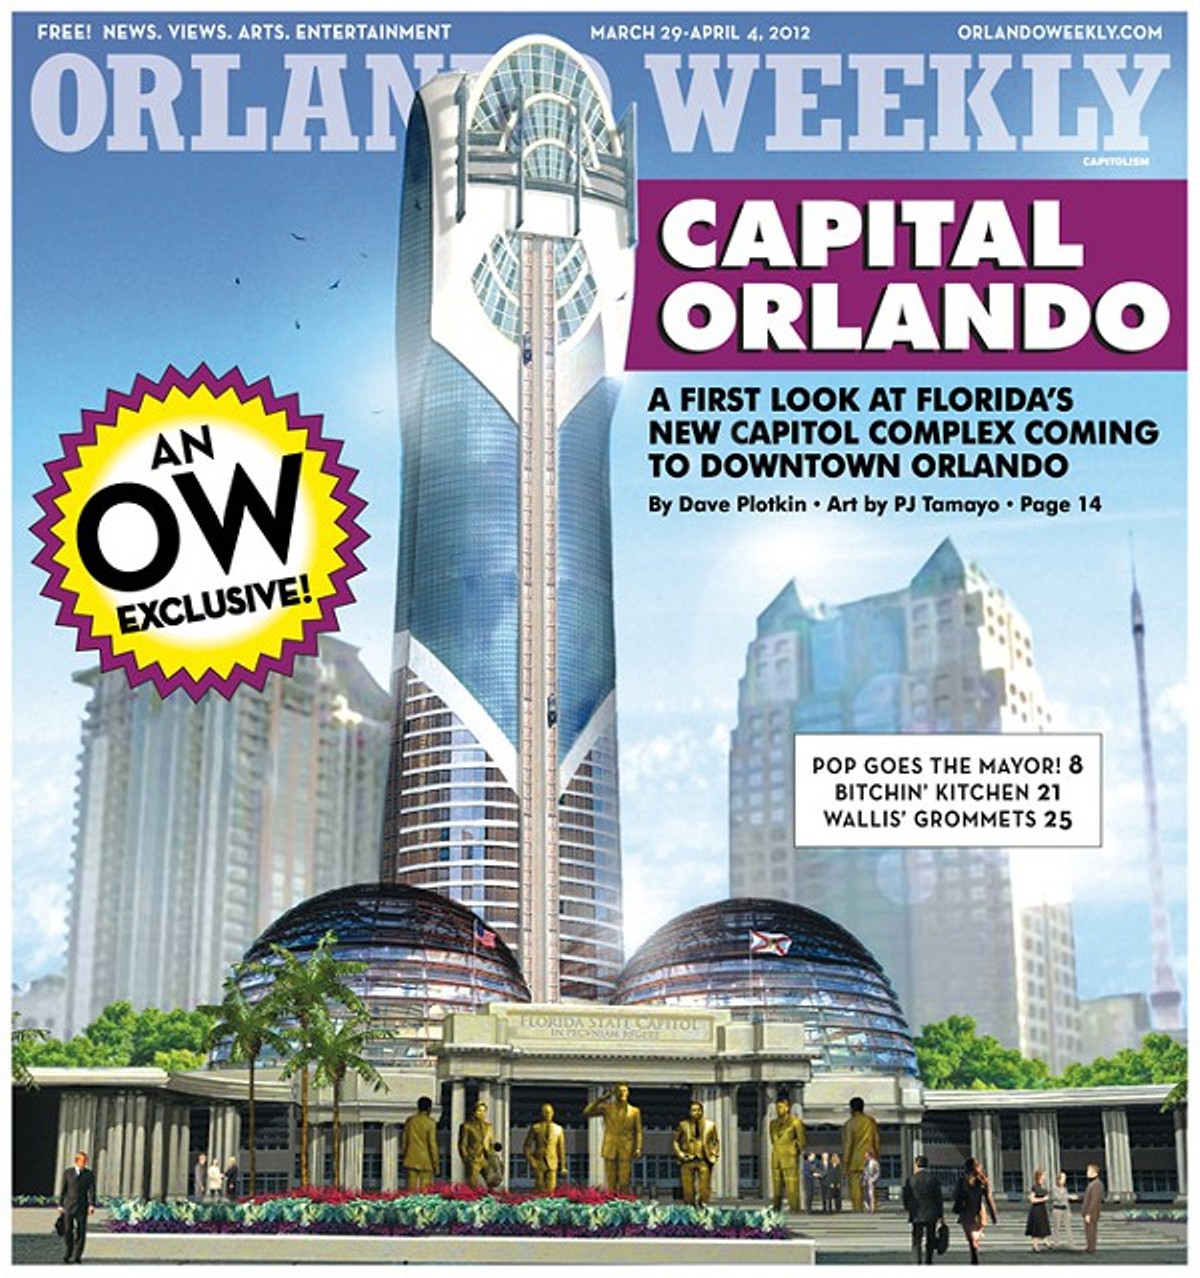 Dave Plotkin reflects on learning to write and design on the fly at Orlando Weekly